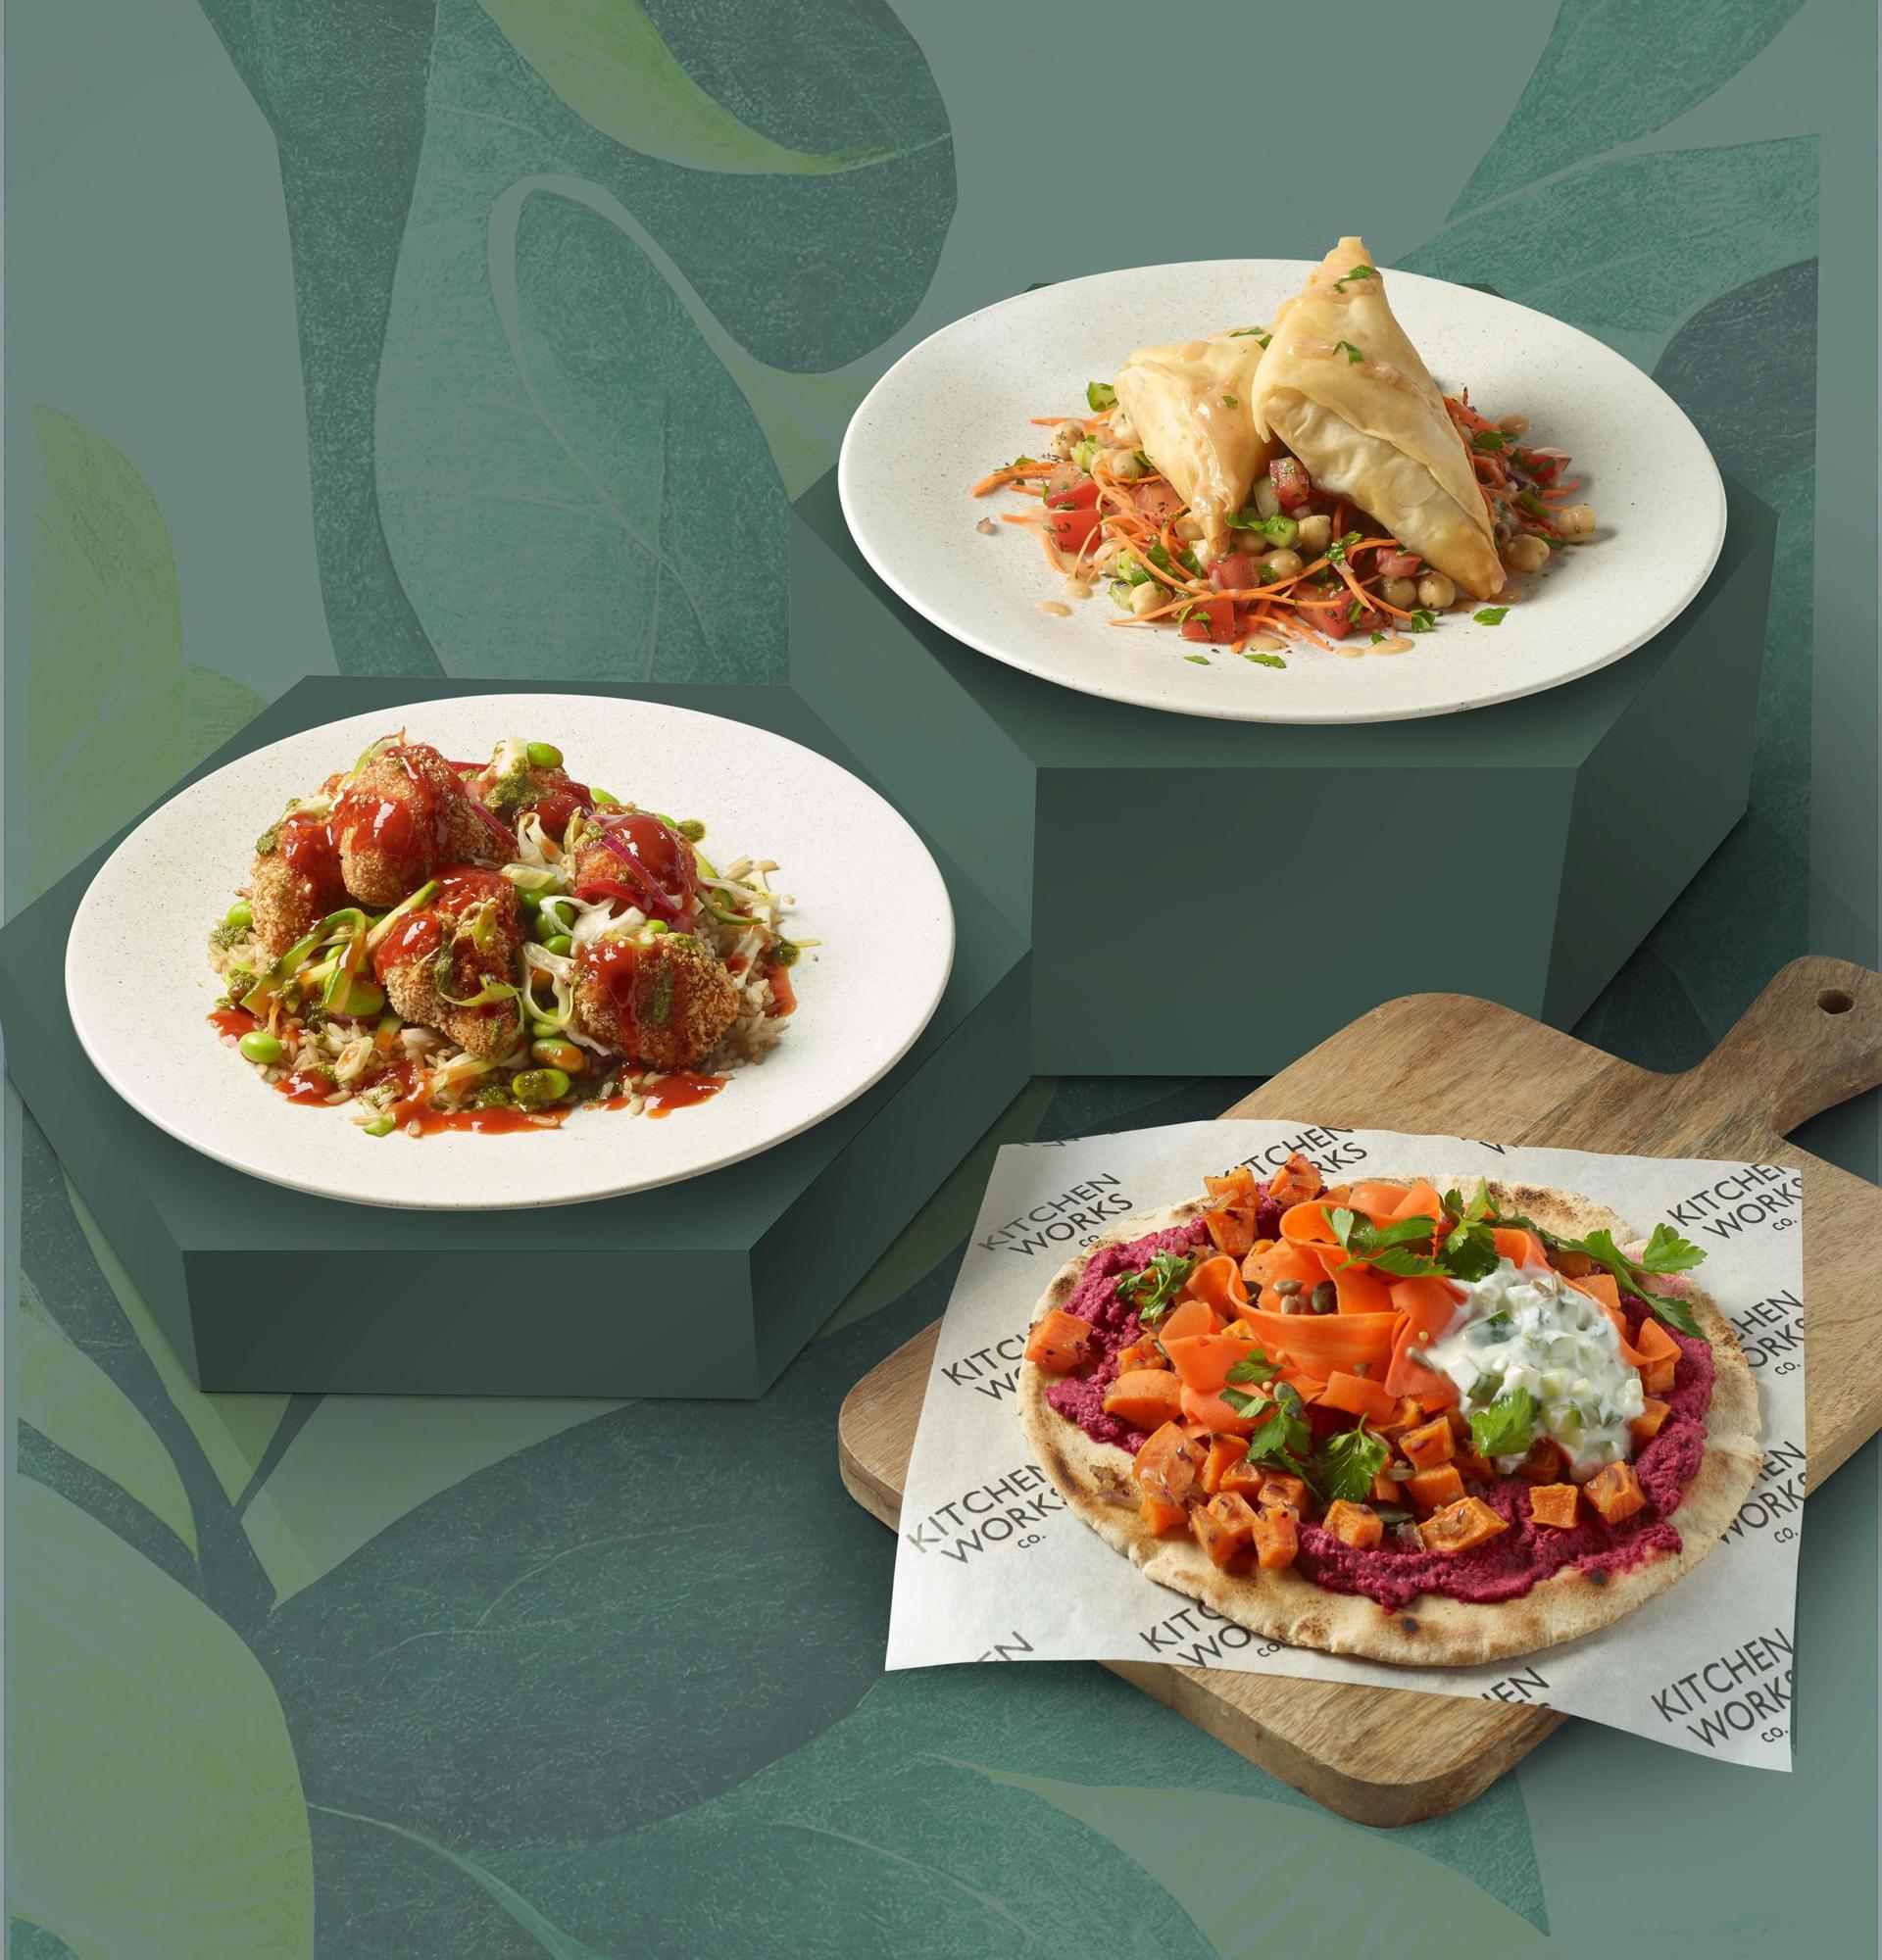 Sodexo Announces Year-On-Year Increase in Popularity of Meat Free Meals